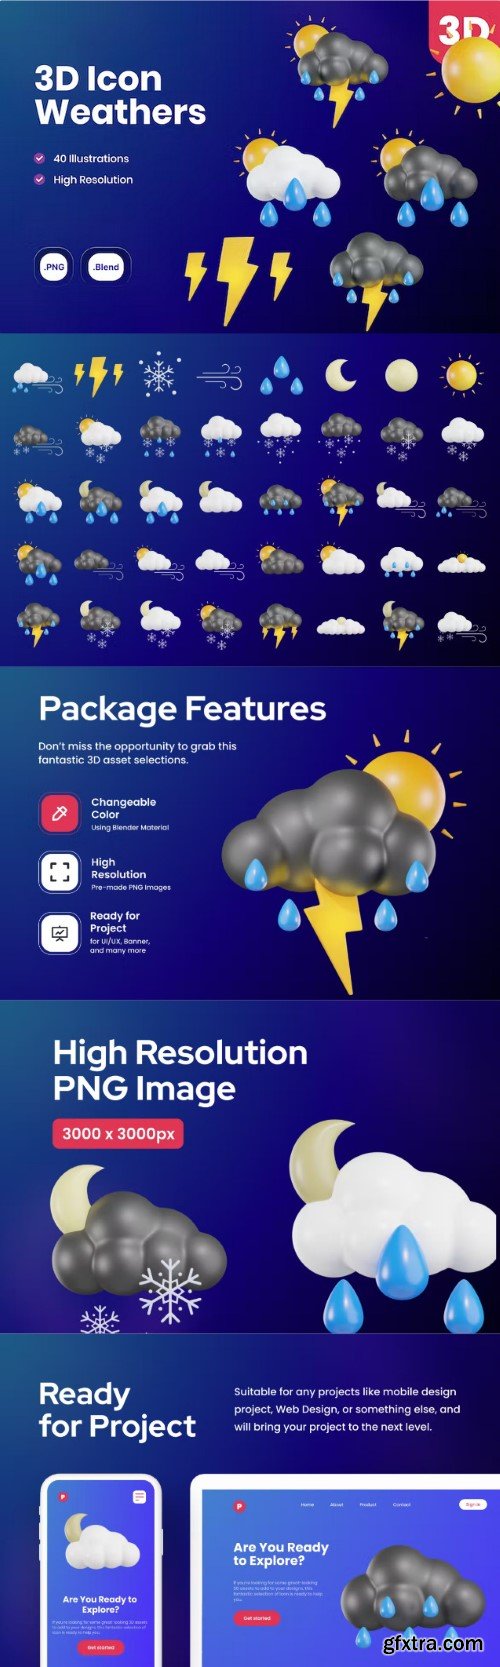 3D Icon Weather Collection